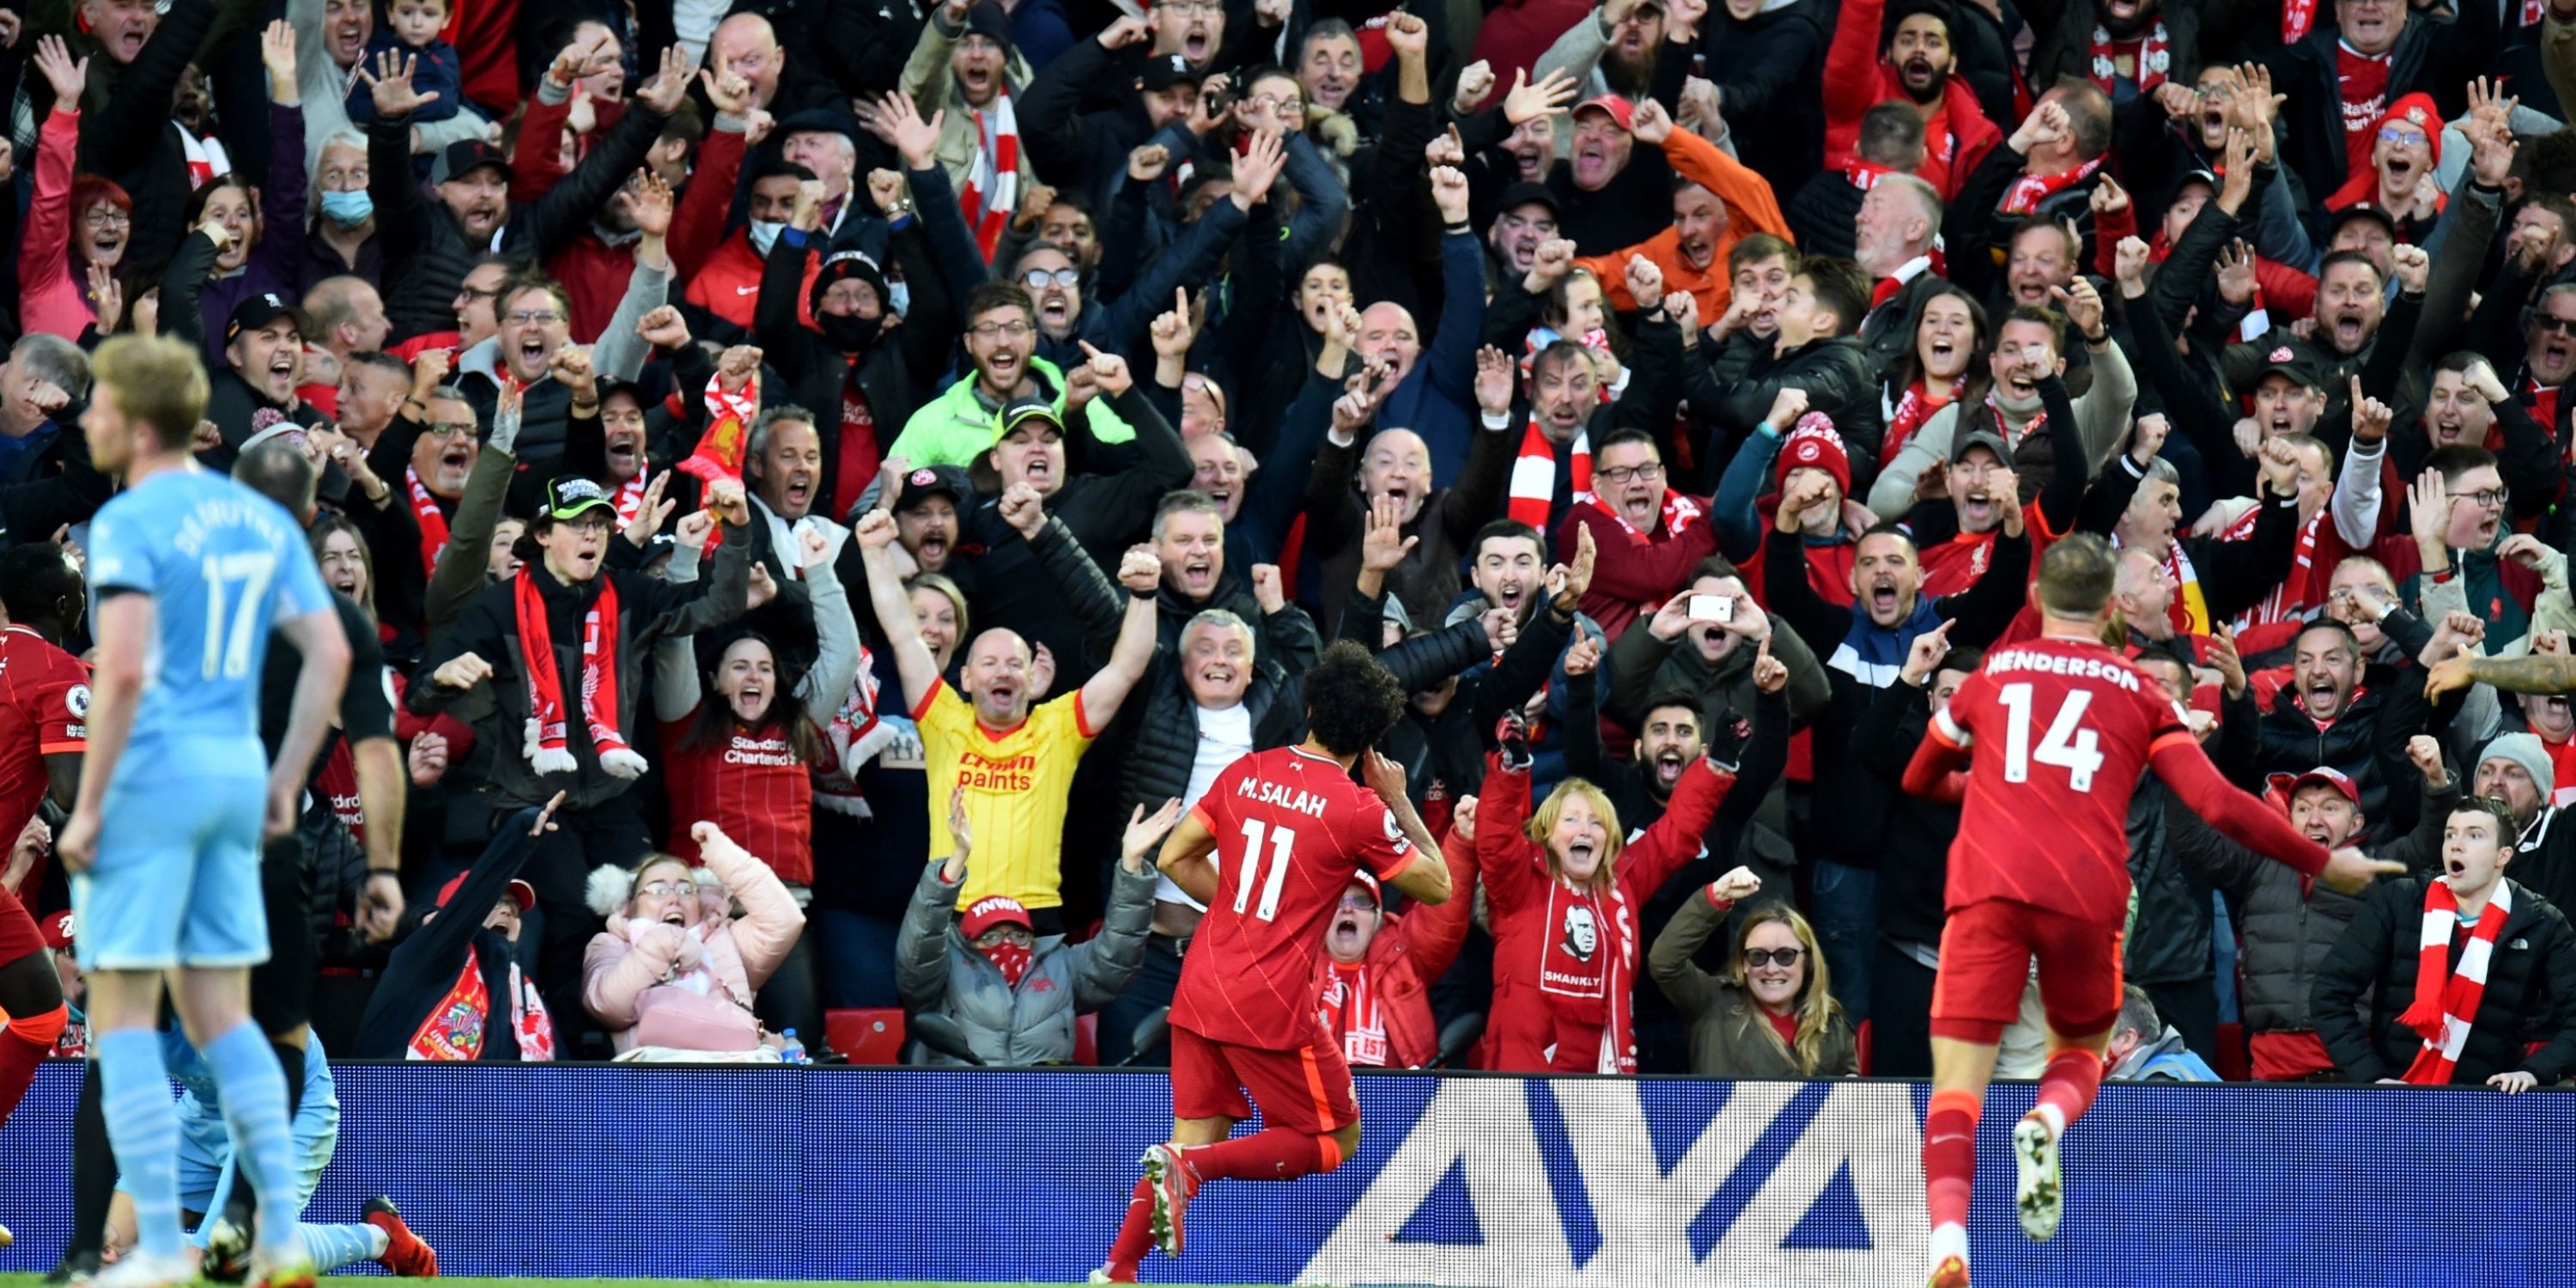 Mohamed Salah celebrates scoring for Liverpool in front of a jubilant crowd.